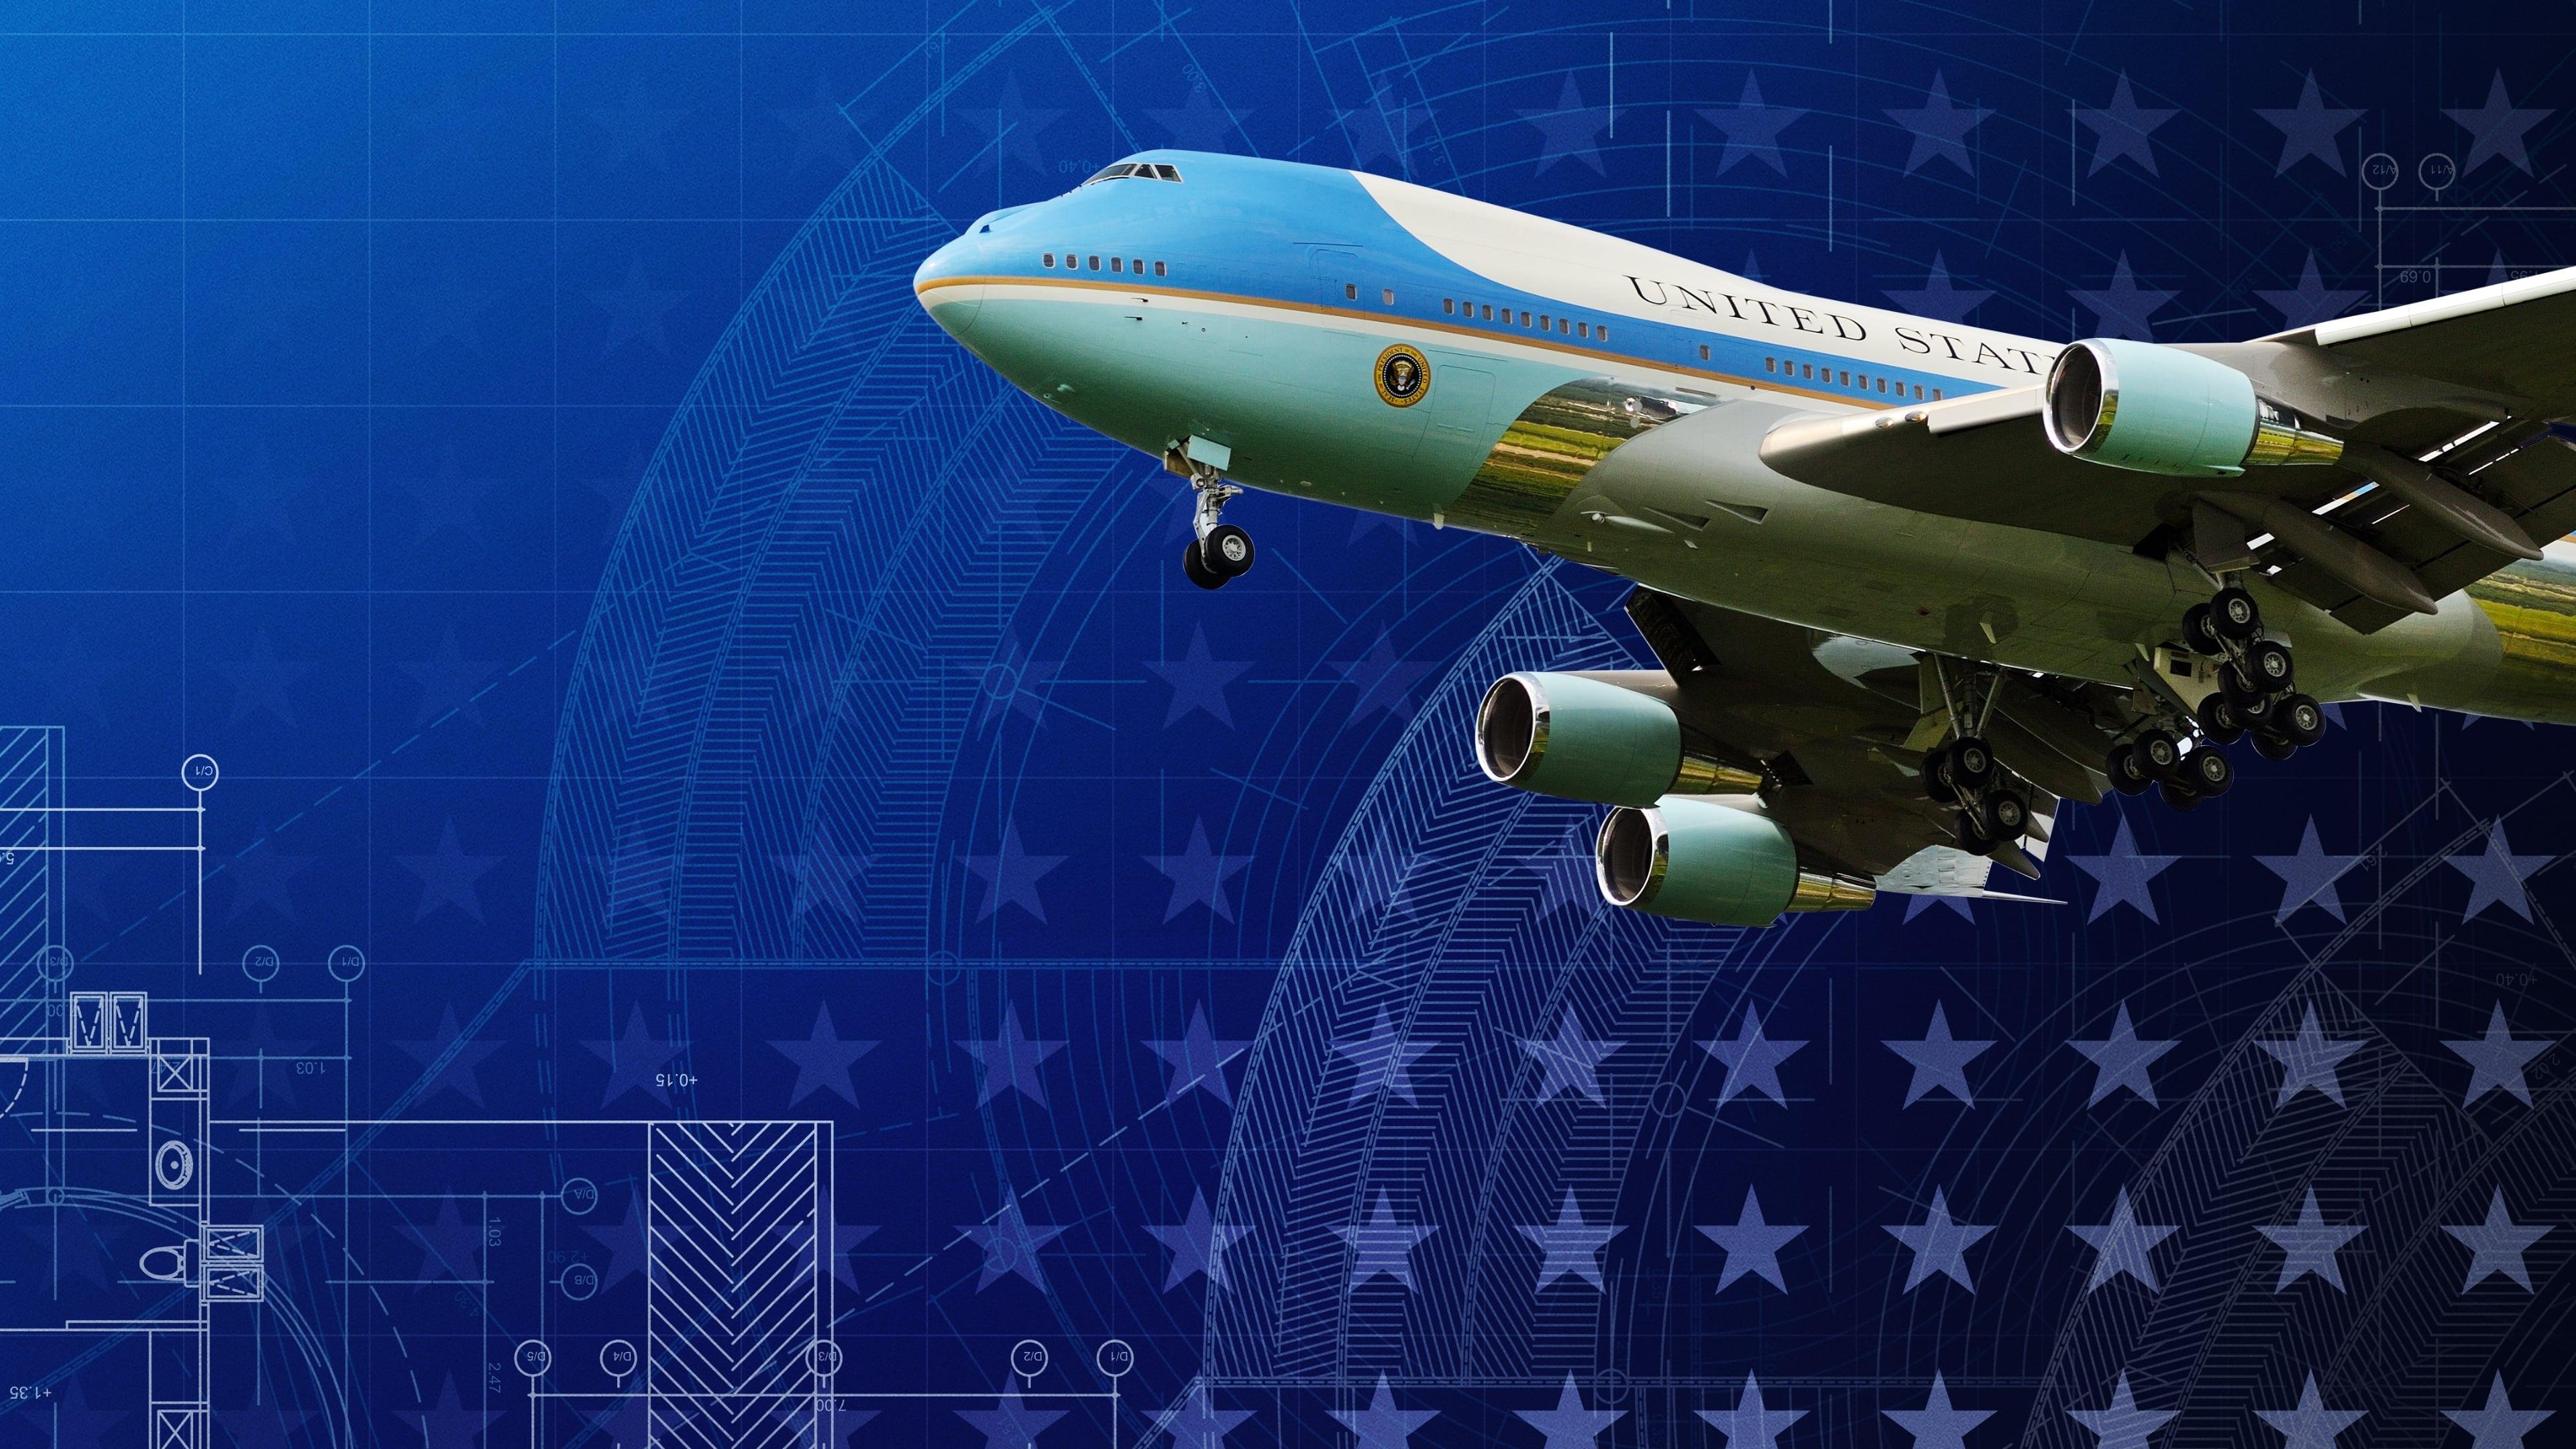 The New Air Force One: Flying Fortress backdrop